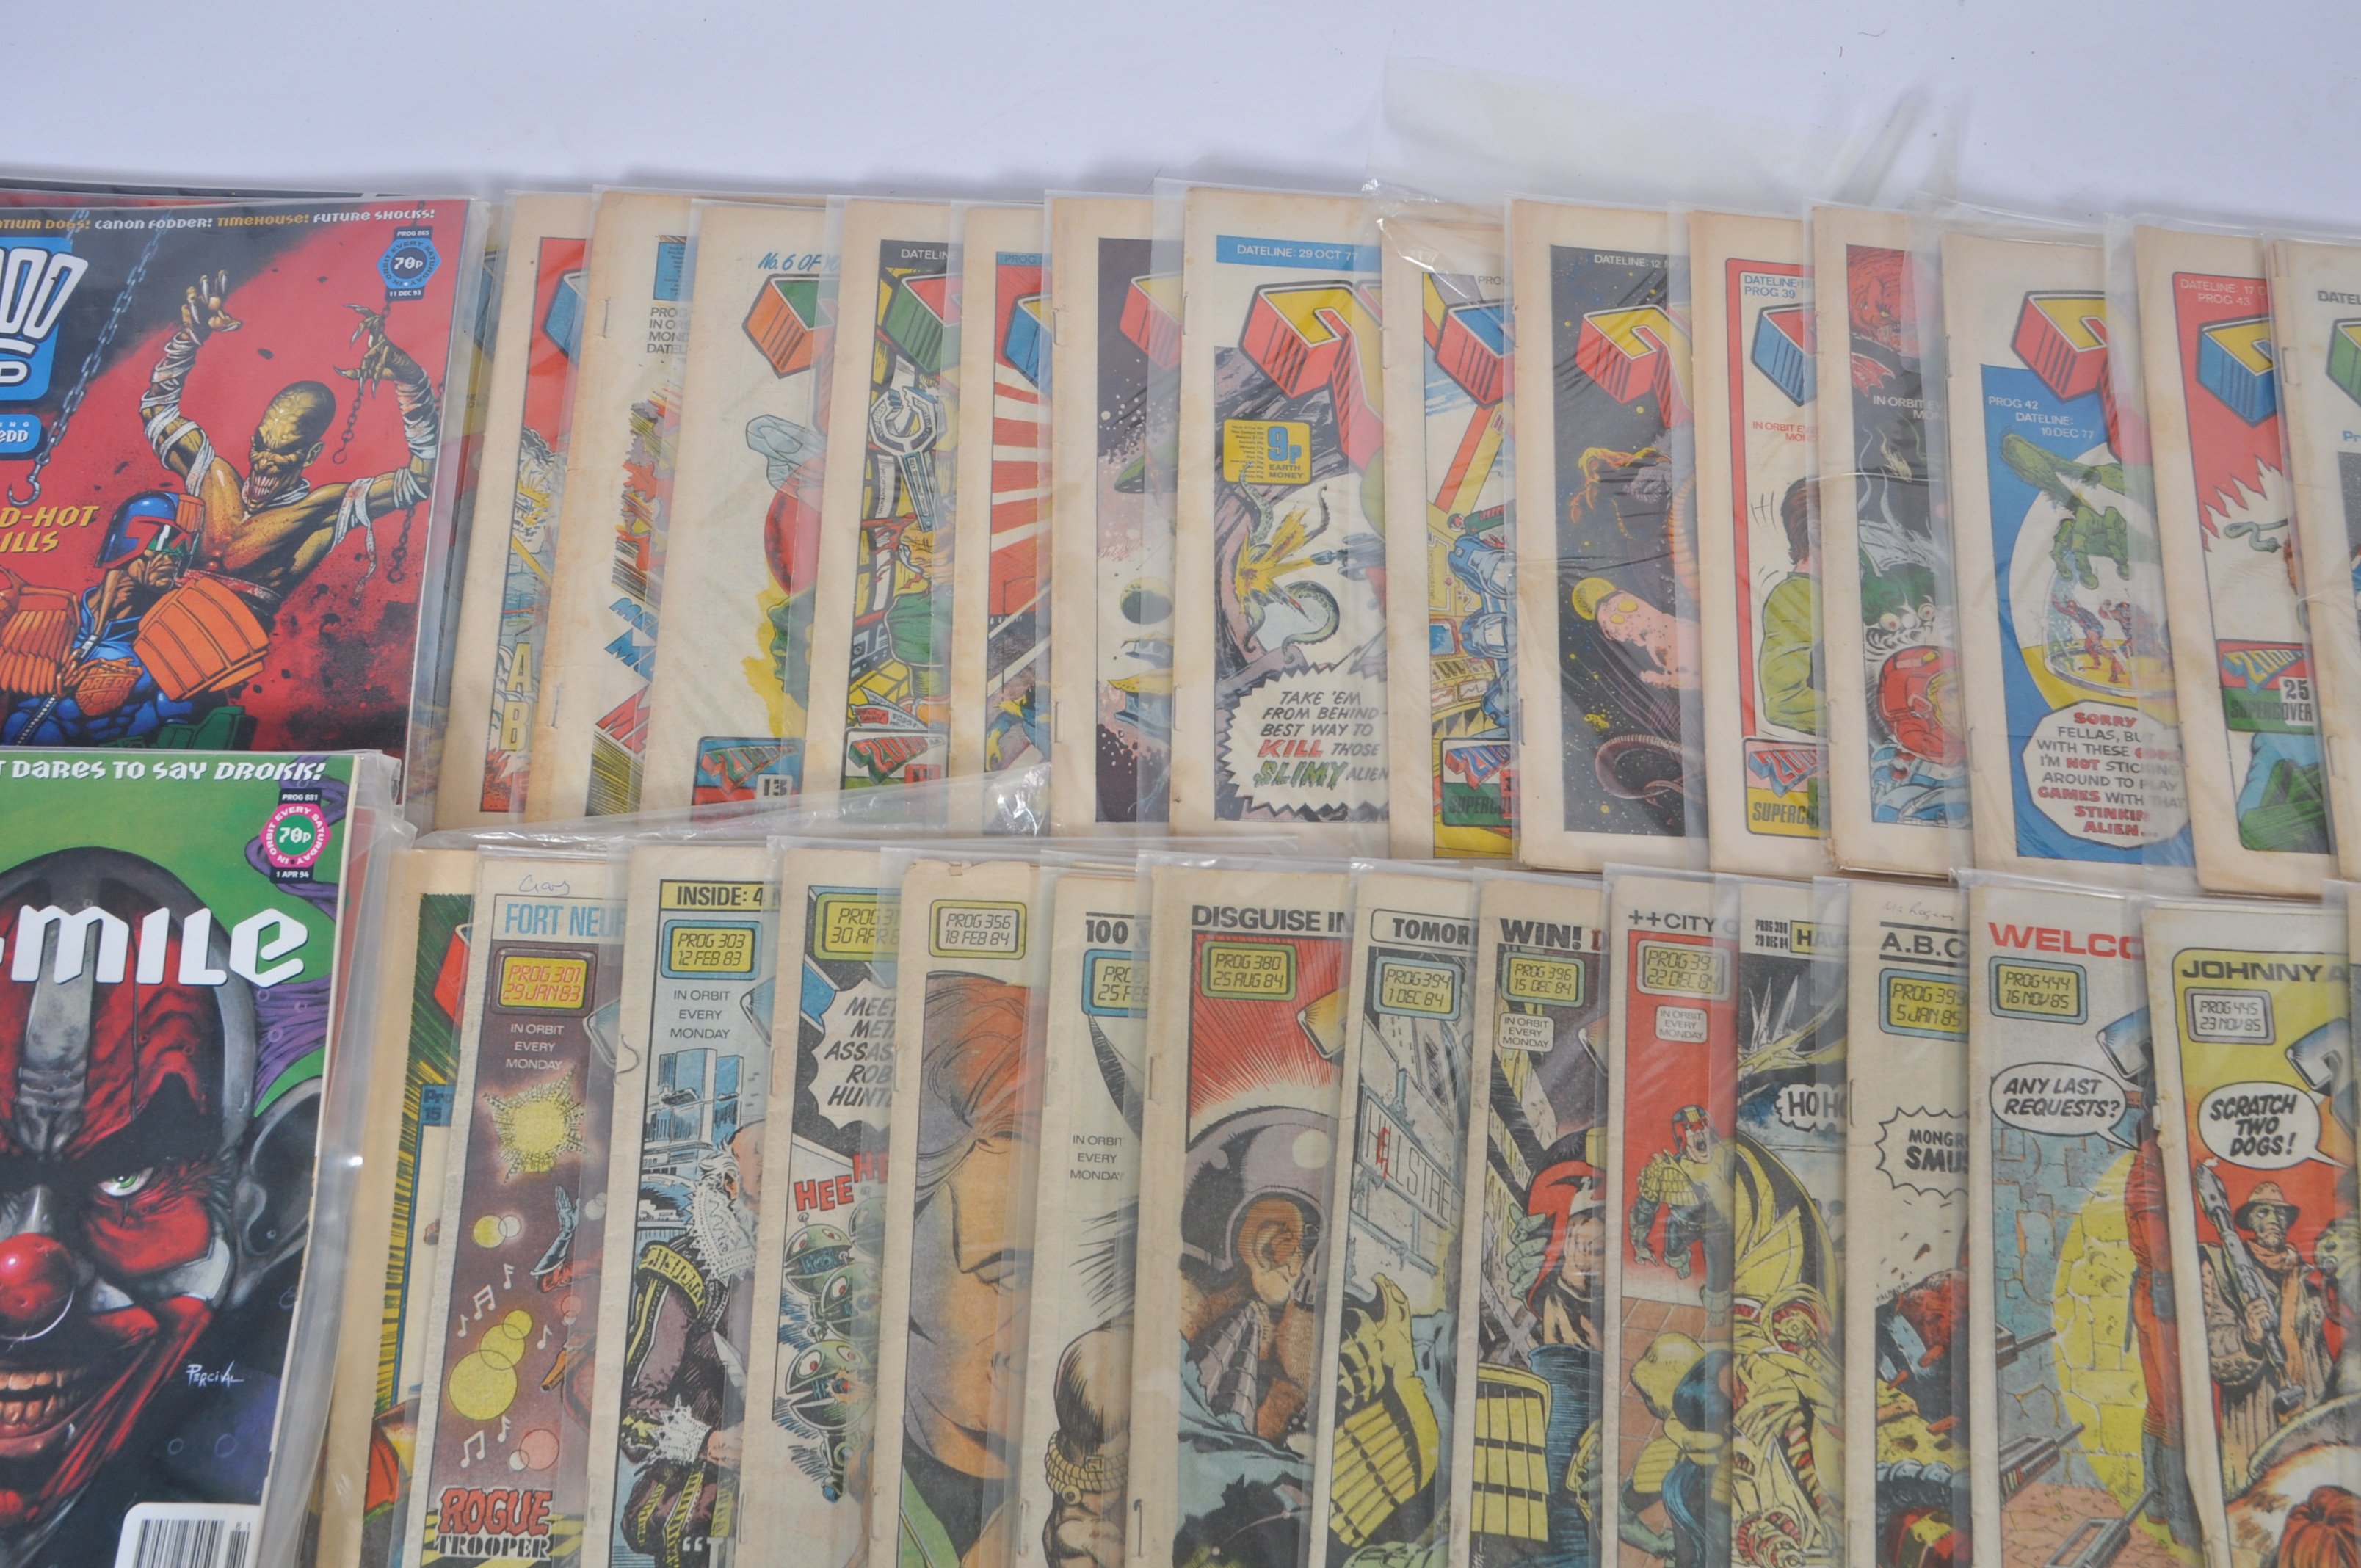 COMIC BOOKS - 2000AD - LARGE COLLECTION OF VINTAGE COMIC BOOKS - Image 11 of 17